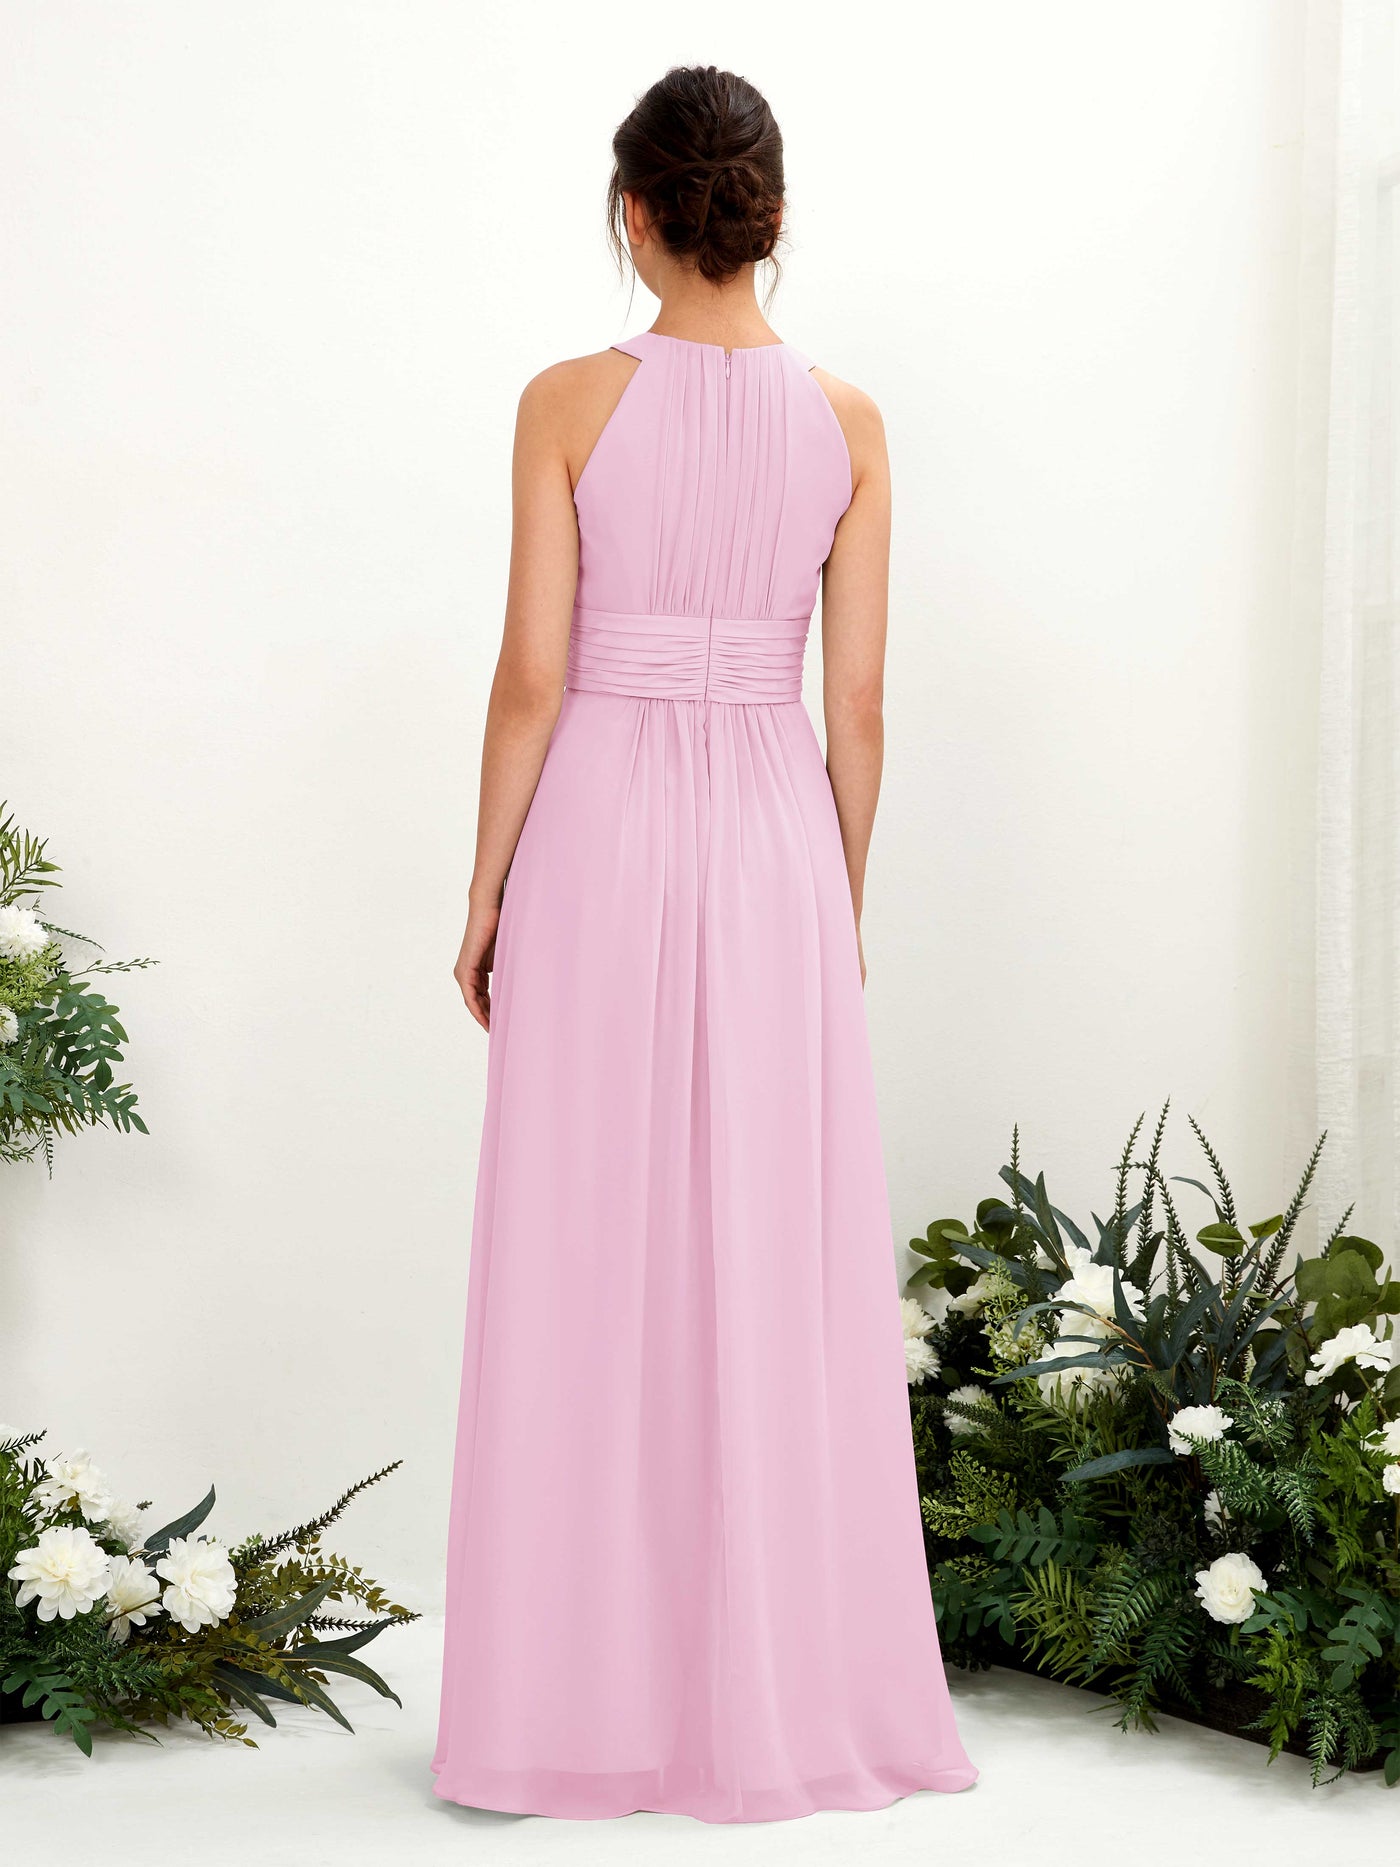 Candy Pink Bridesmaid Dresses Bridesmaid Dress A-line Chiffon Halter Full Length Sleeveless Wedding Party Dress (81221539)#color_candy-pink